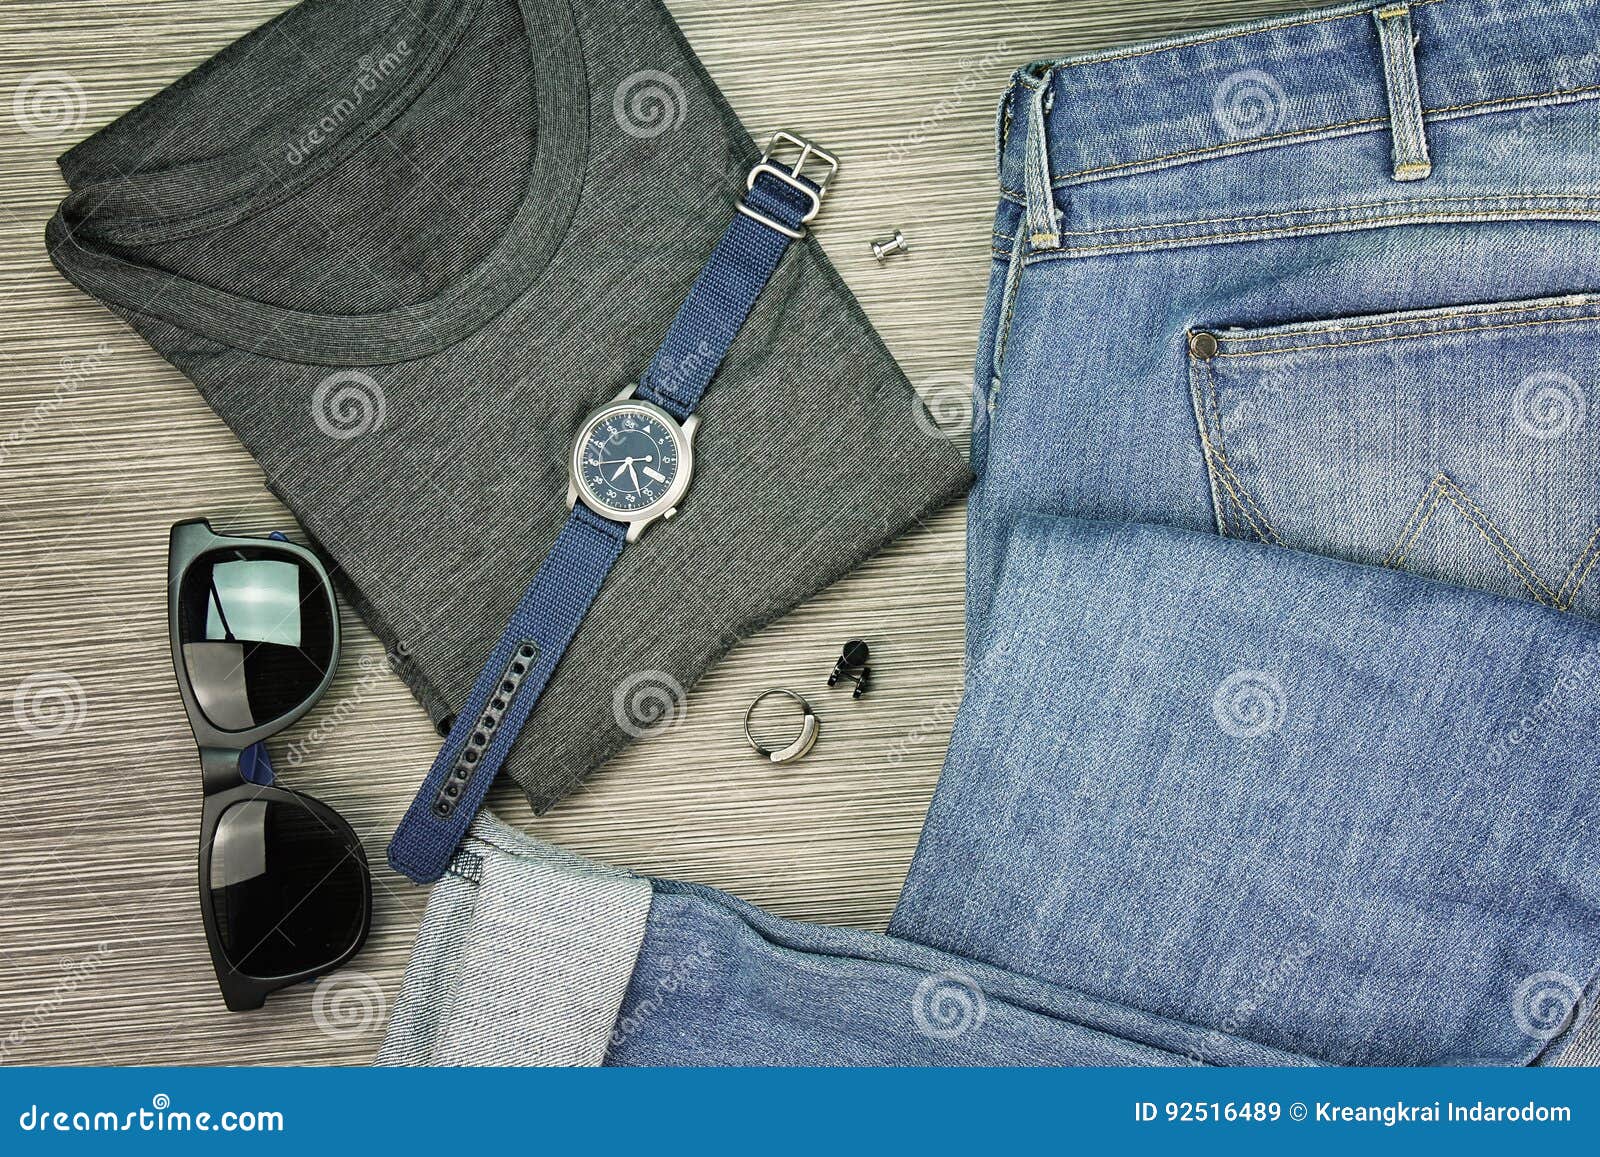 men fashion, casual outfits, set of clothes and various accessories.